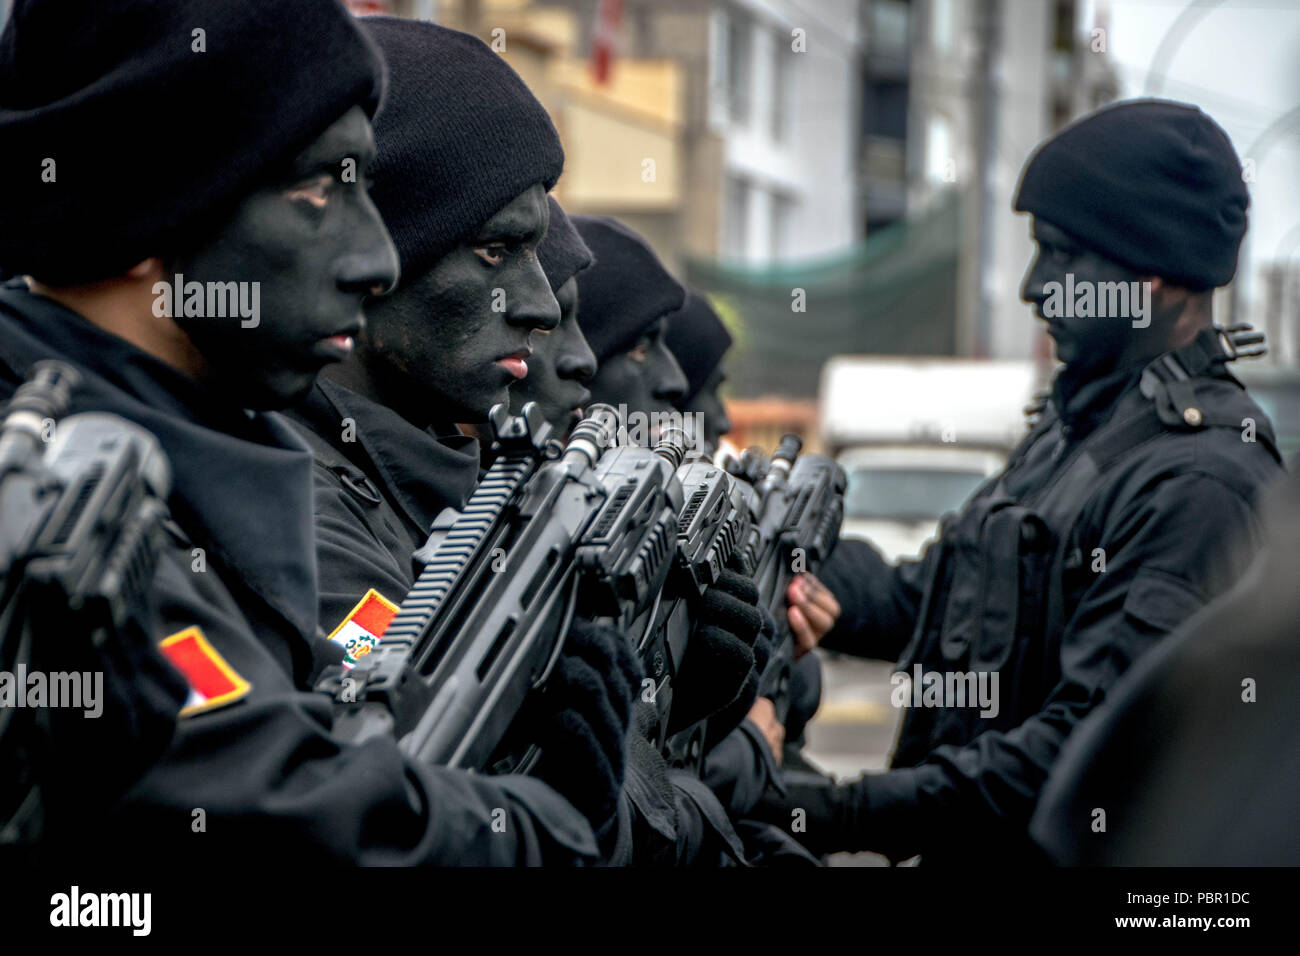 Lima, Lima Region, Peru. 29th July, 2018. Peruvian special forces with fearsome face paint seen marching.Members of Peru's armed forces, coastguard, search & rescue, and police march in full uniform during the country's Gran Parada Militar. This parade always occurs the day after Peru's Independence Day marking the official end of festivities across the nation. Credit: Jason Sheil/SOPA Images/ZUMA Wire/Alamy Live News Stock Photo